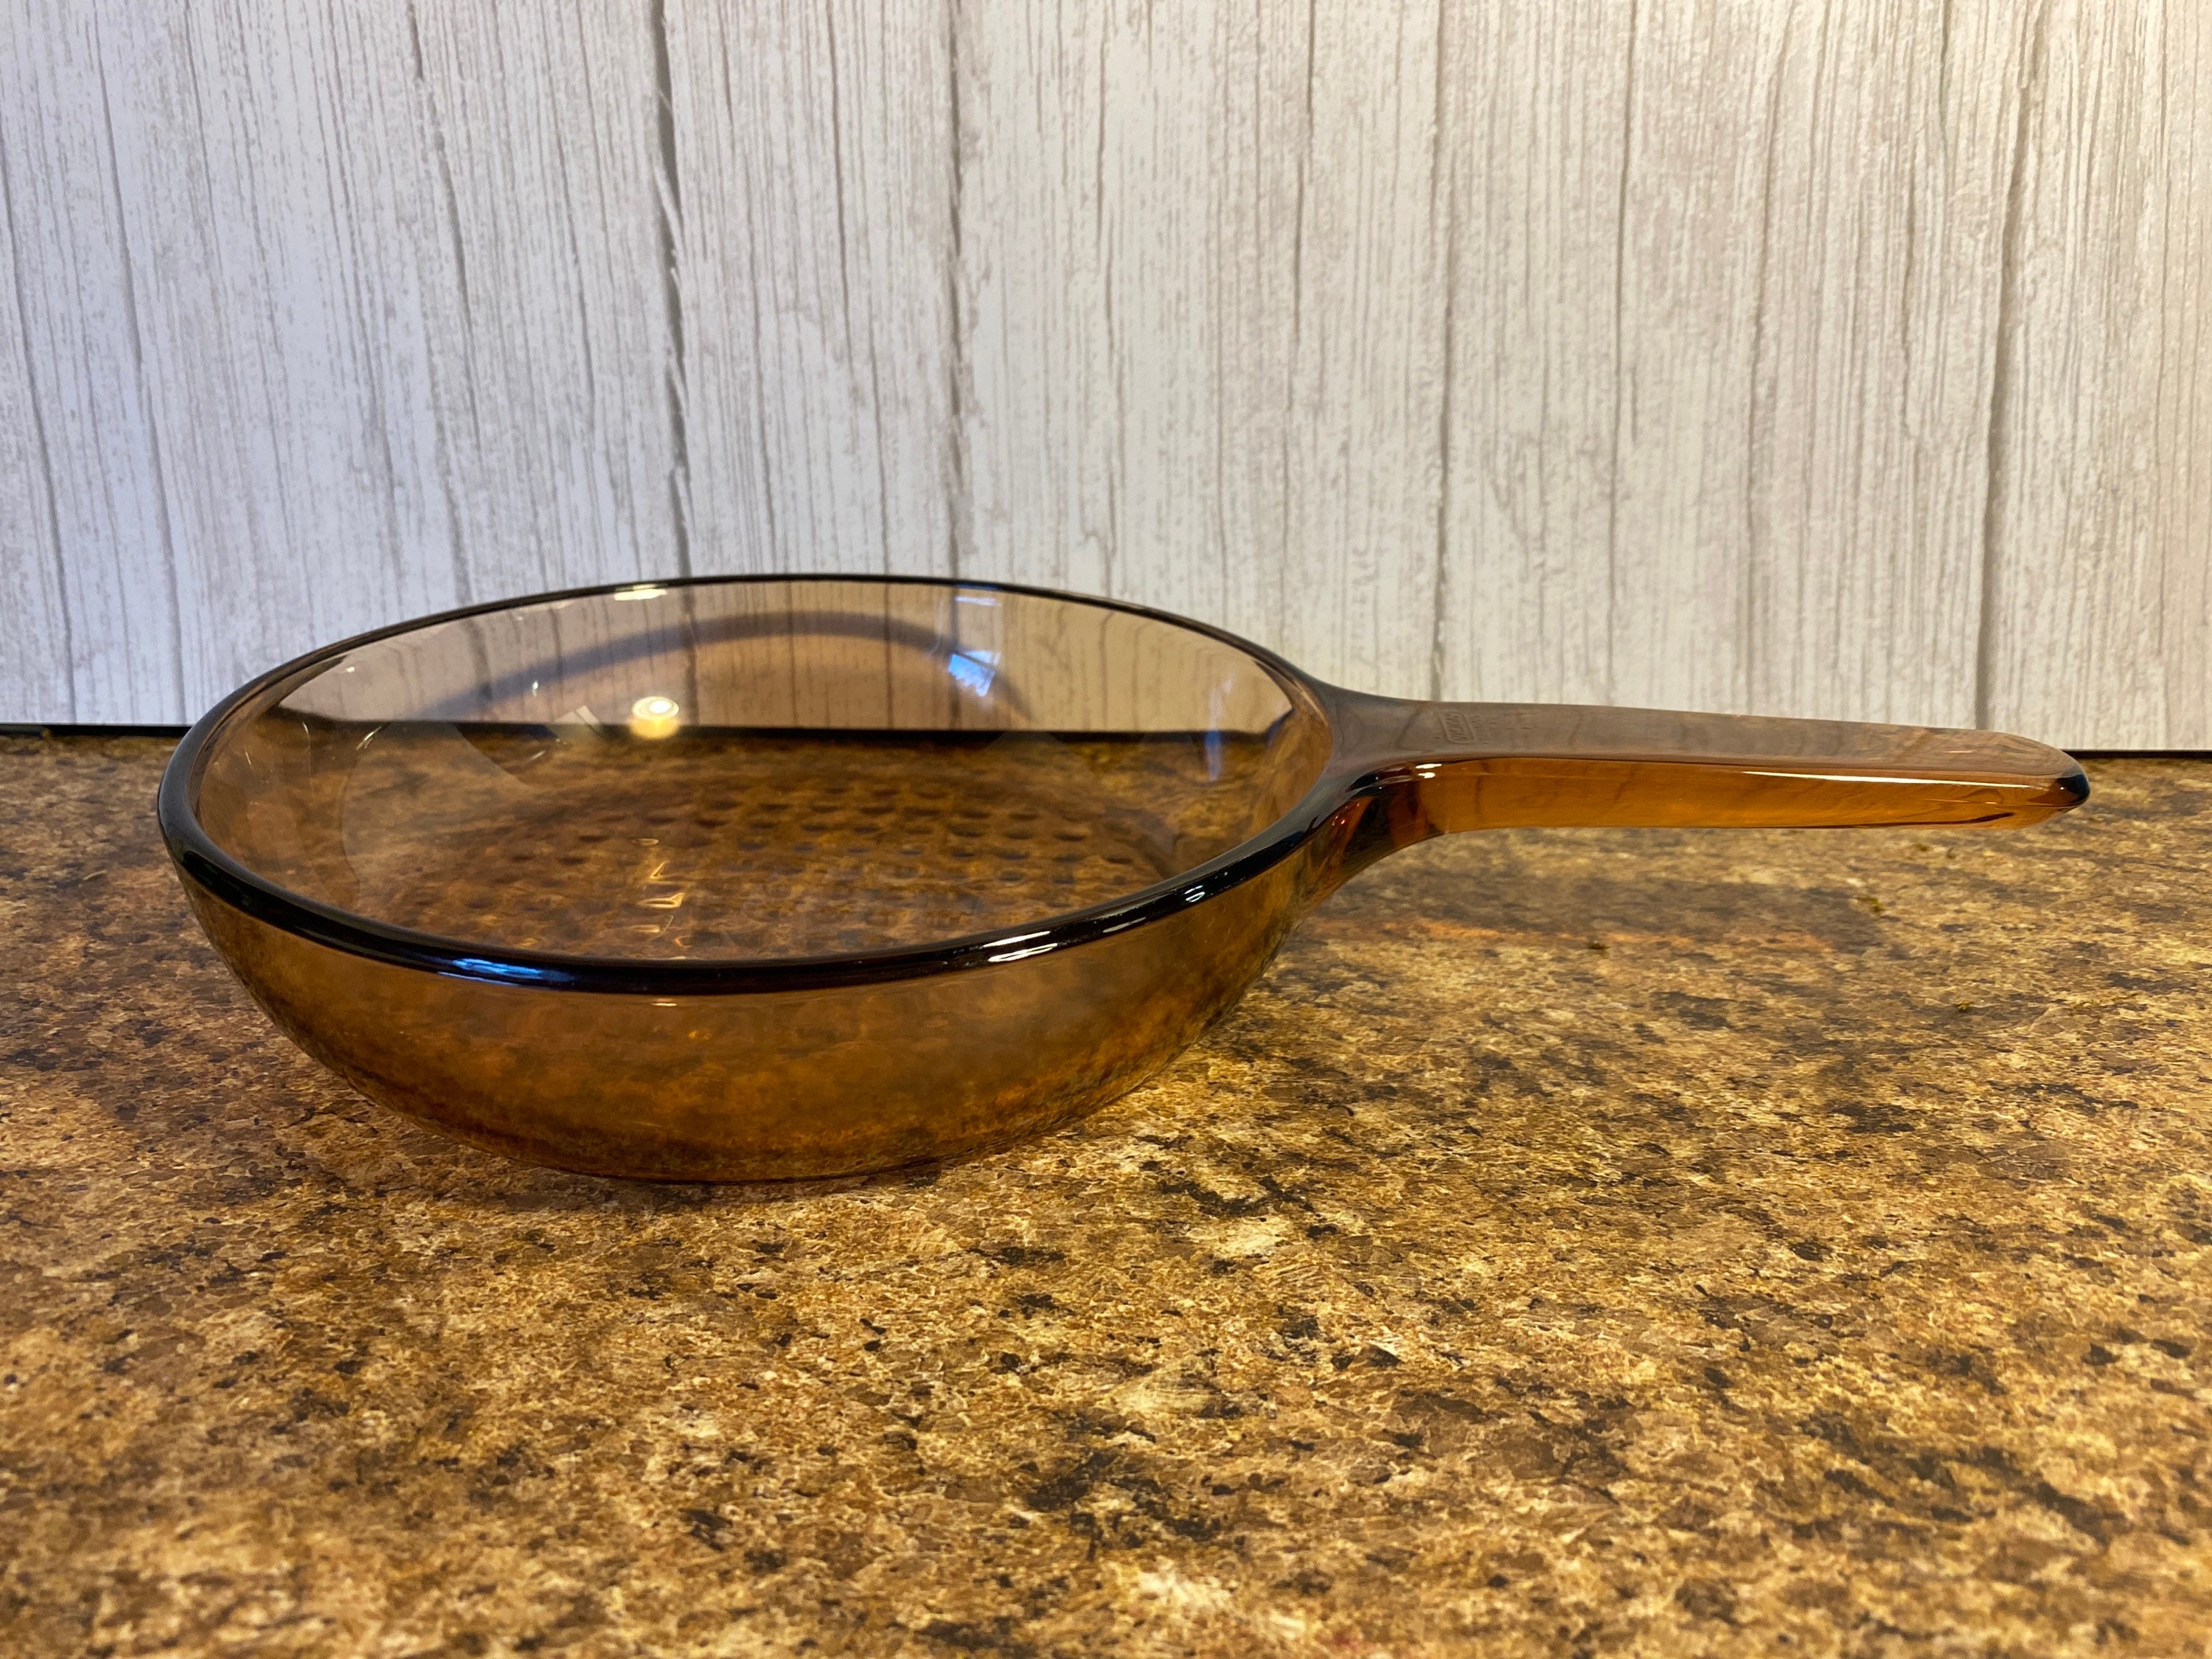 Visions Corning France Amber Glass 7 Inch Skillet Frying Pan Cookware  Visions Corning Ware Brown Glass Pan Oven Safe 